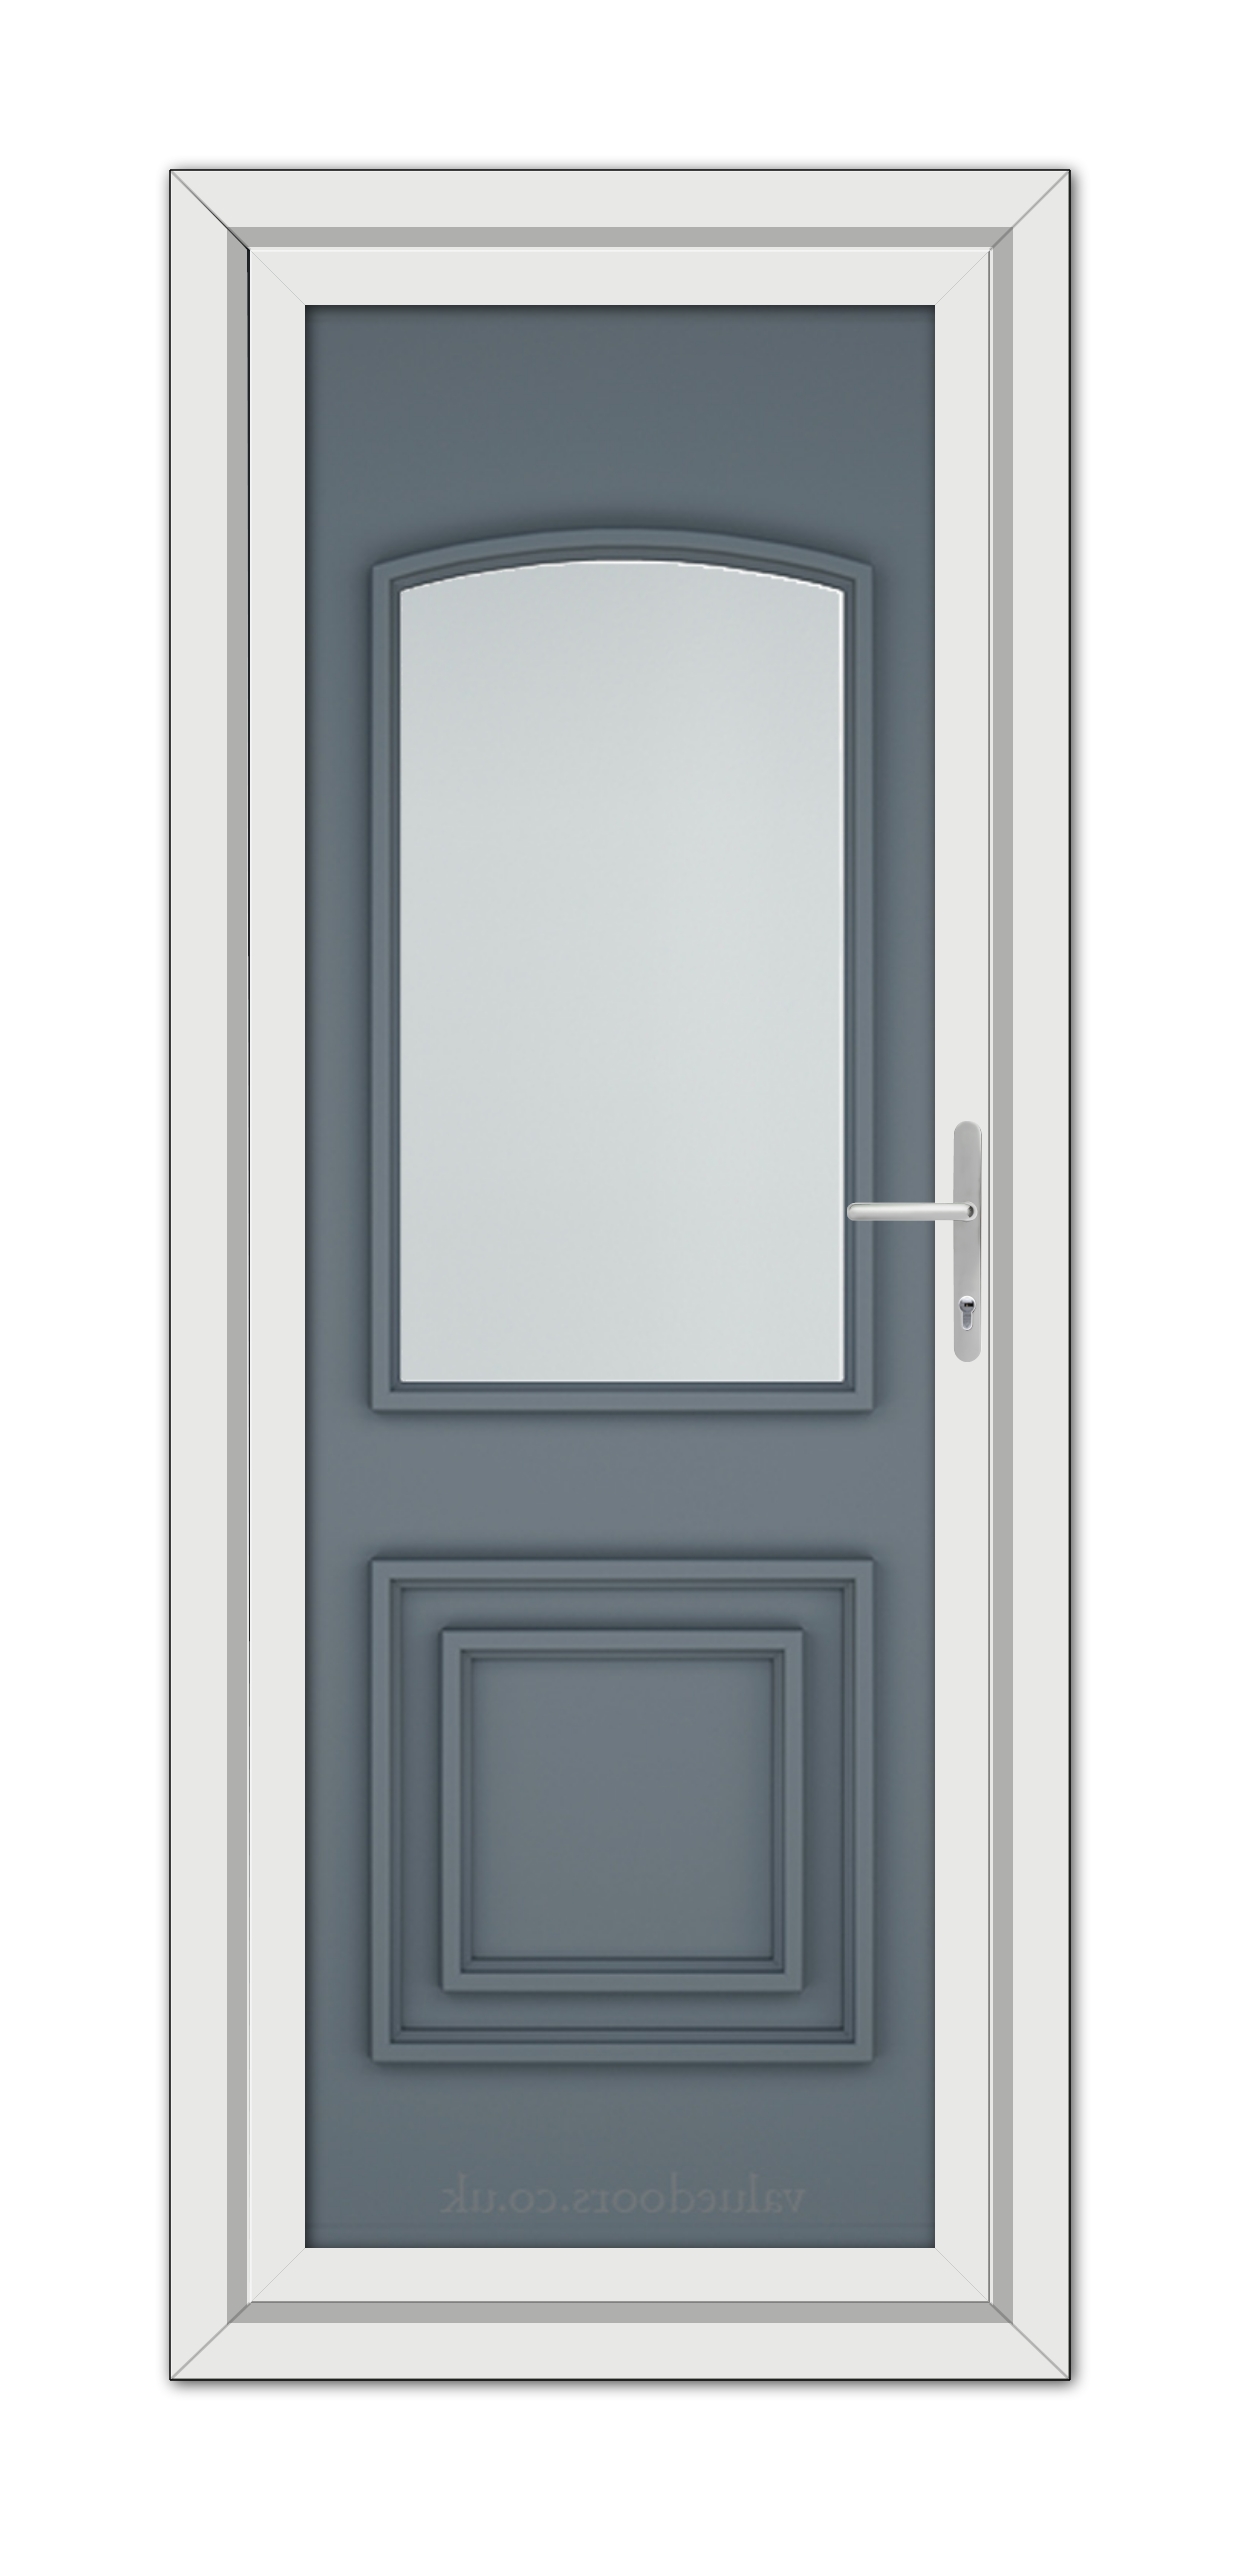 A Slate Grey Balmoral Classic uPVC Door with a glass panel.